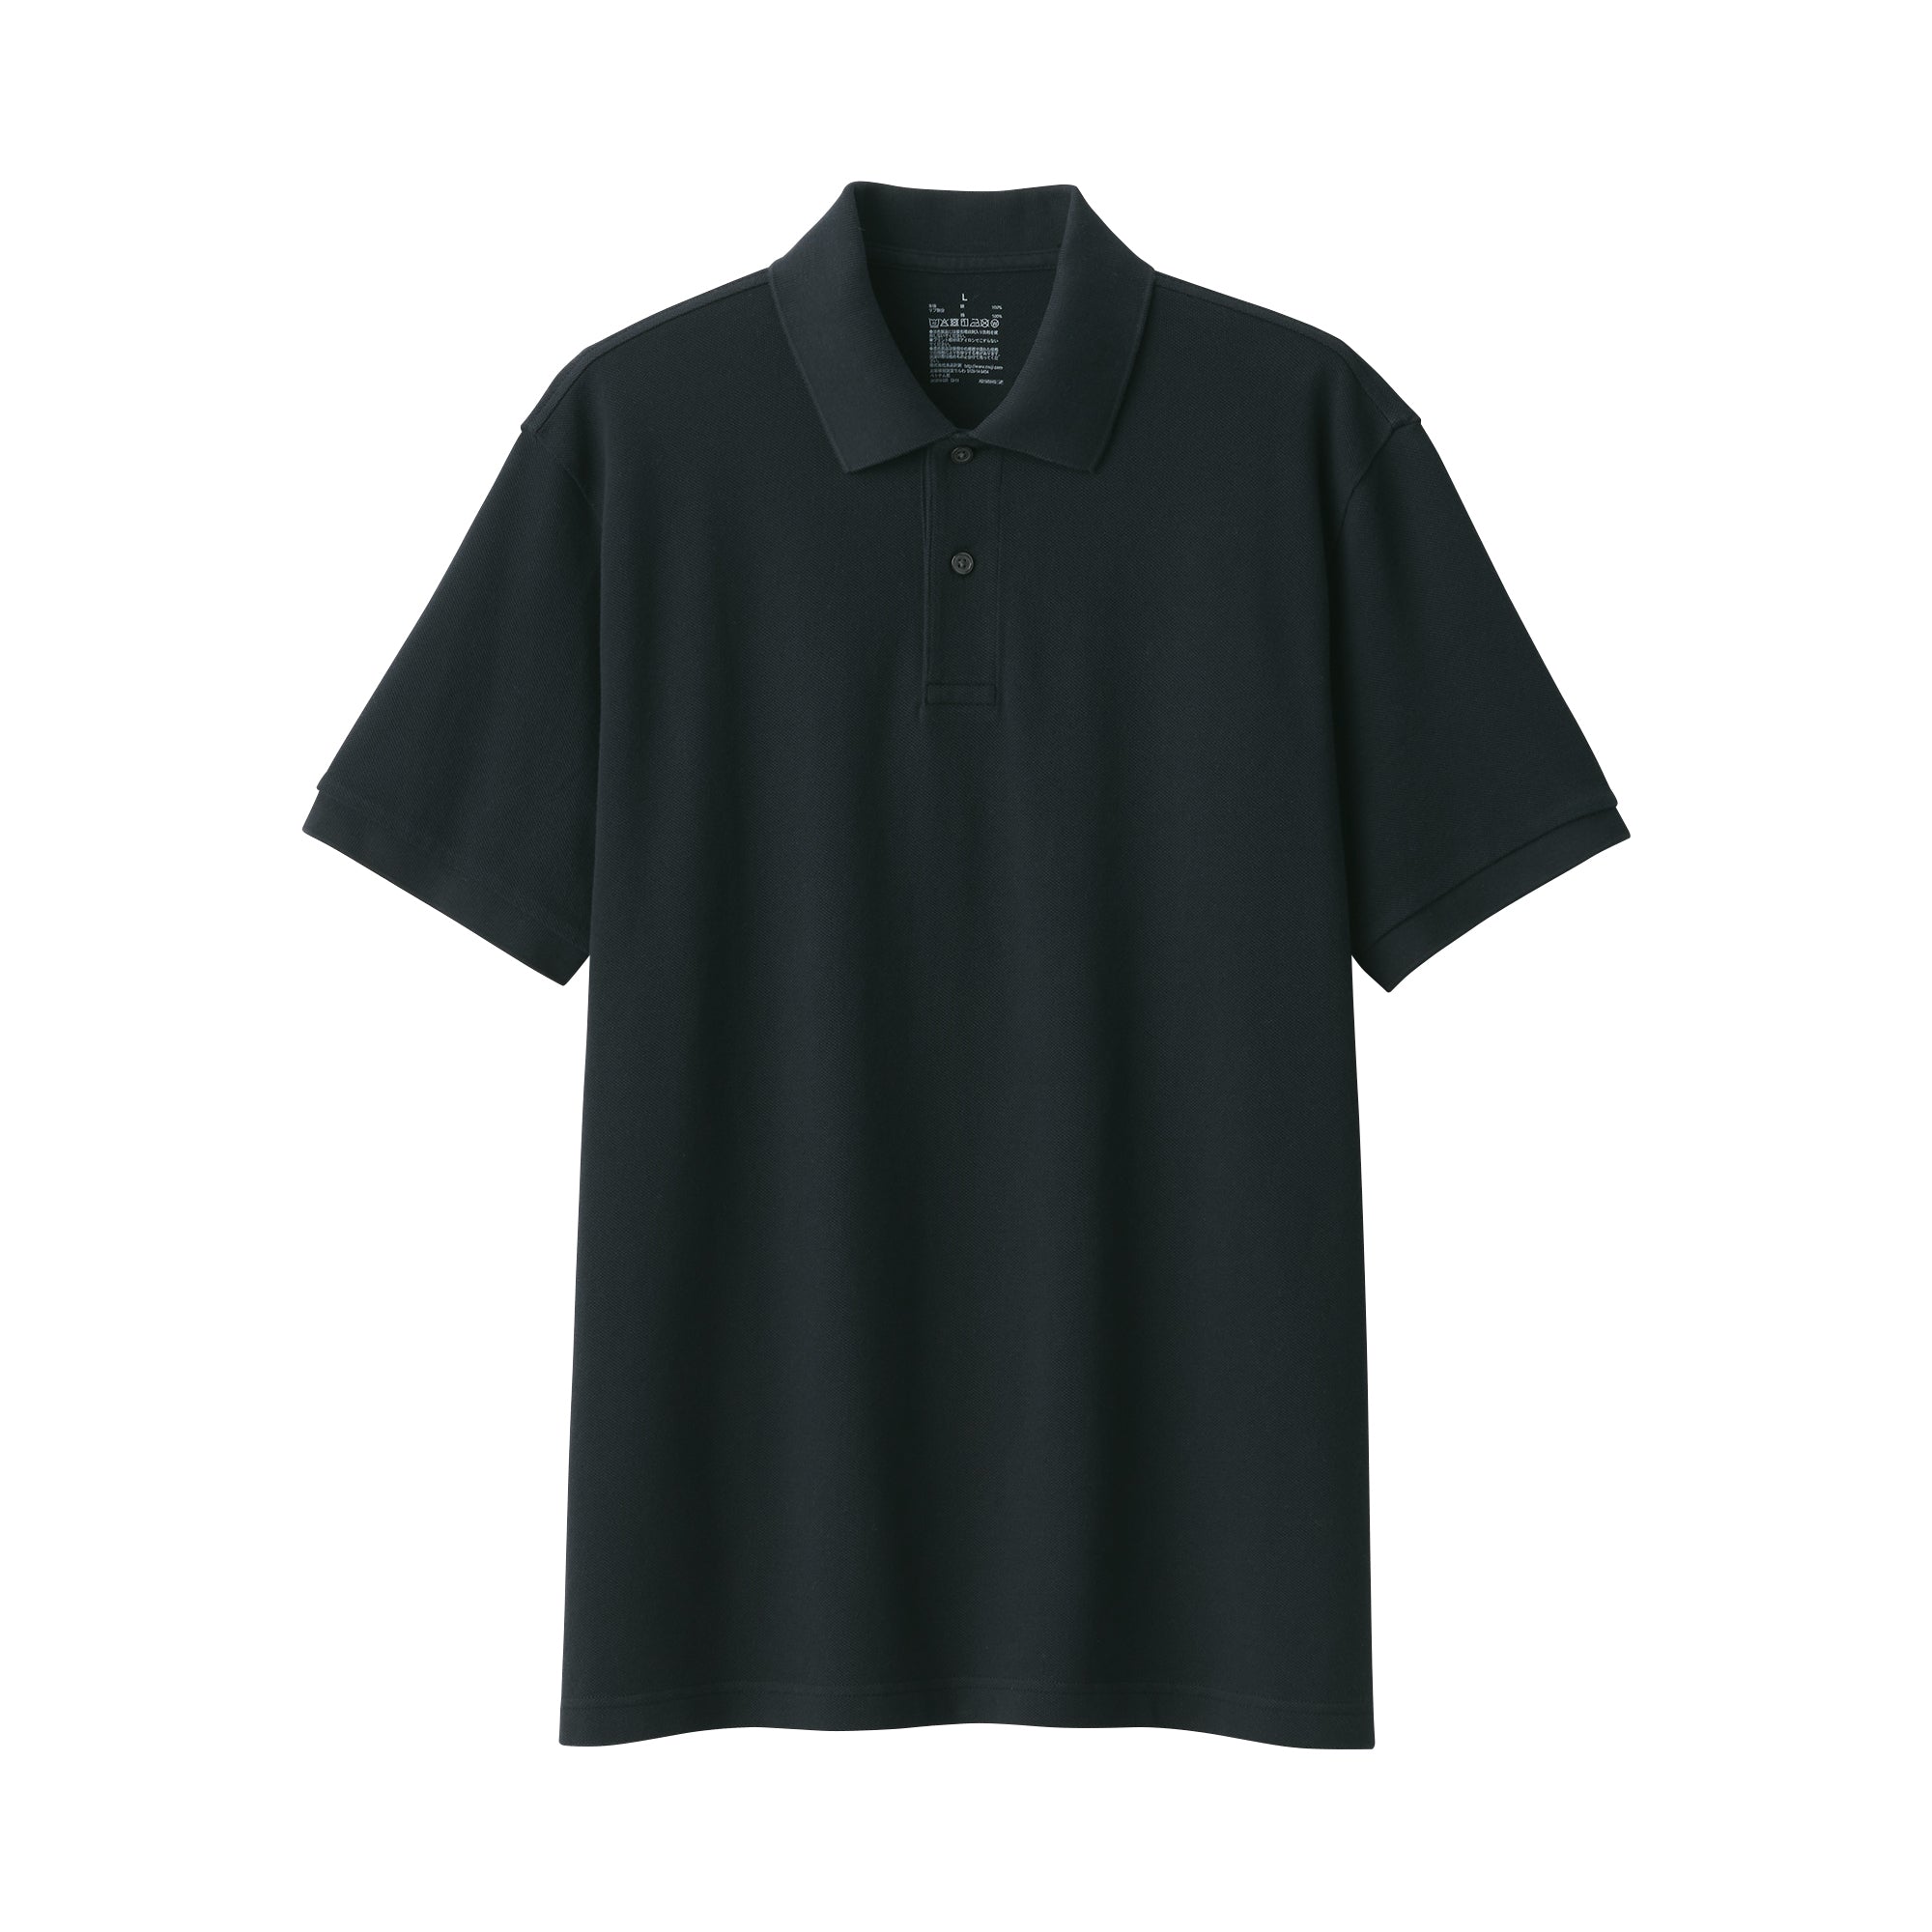 Men's Washed Pique Short Sleeve Polo Shirt